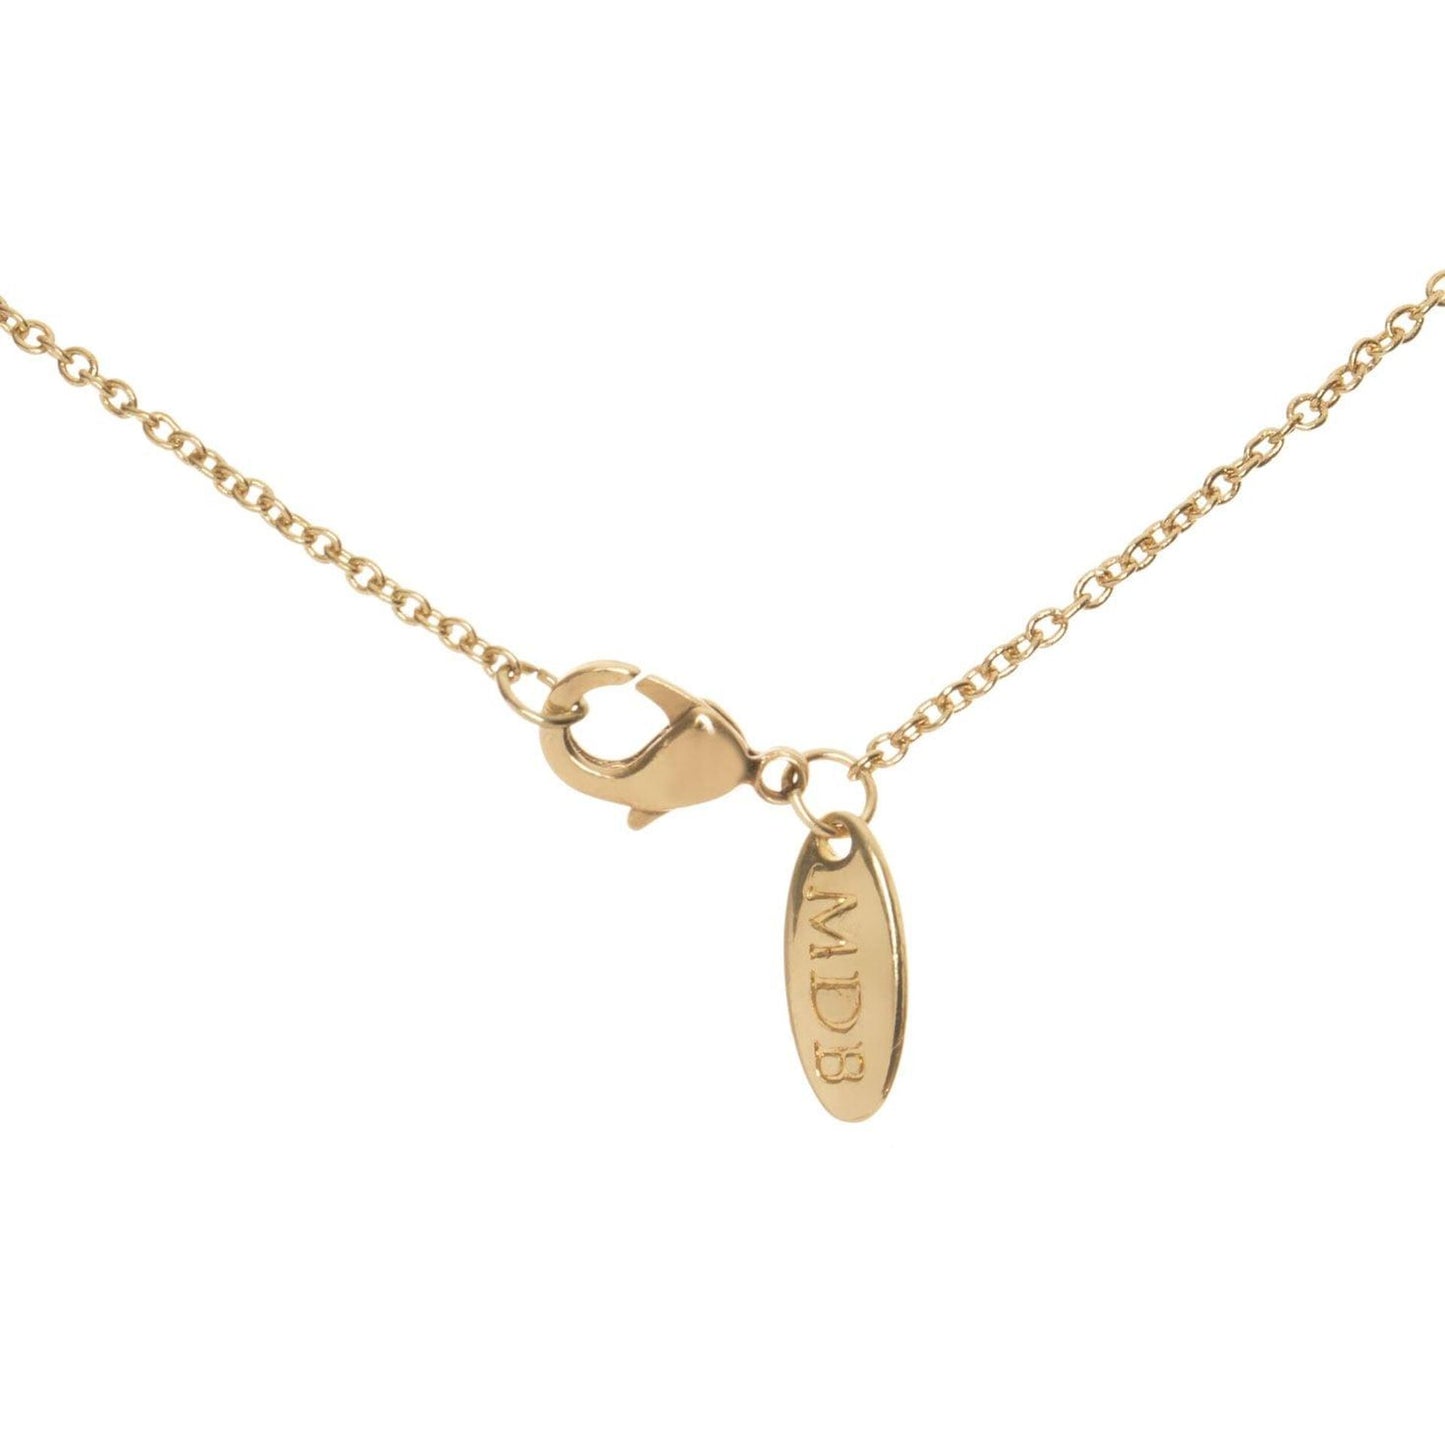 Lumiela Personalized Nameplate Morgan Necklace in Gold Tone